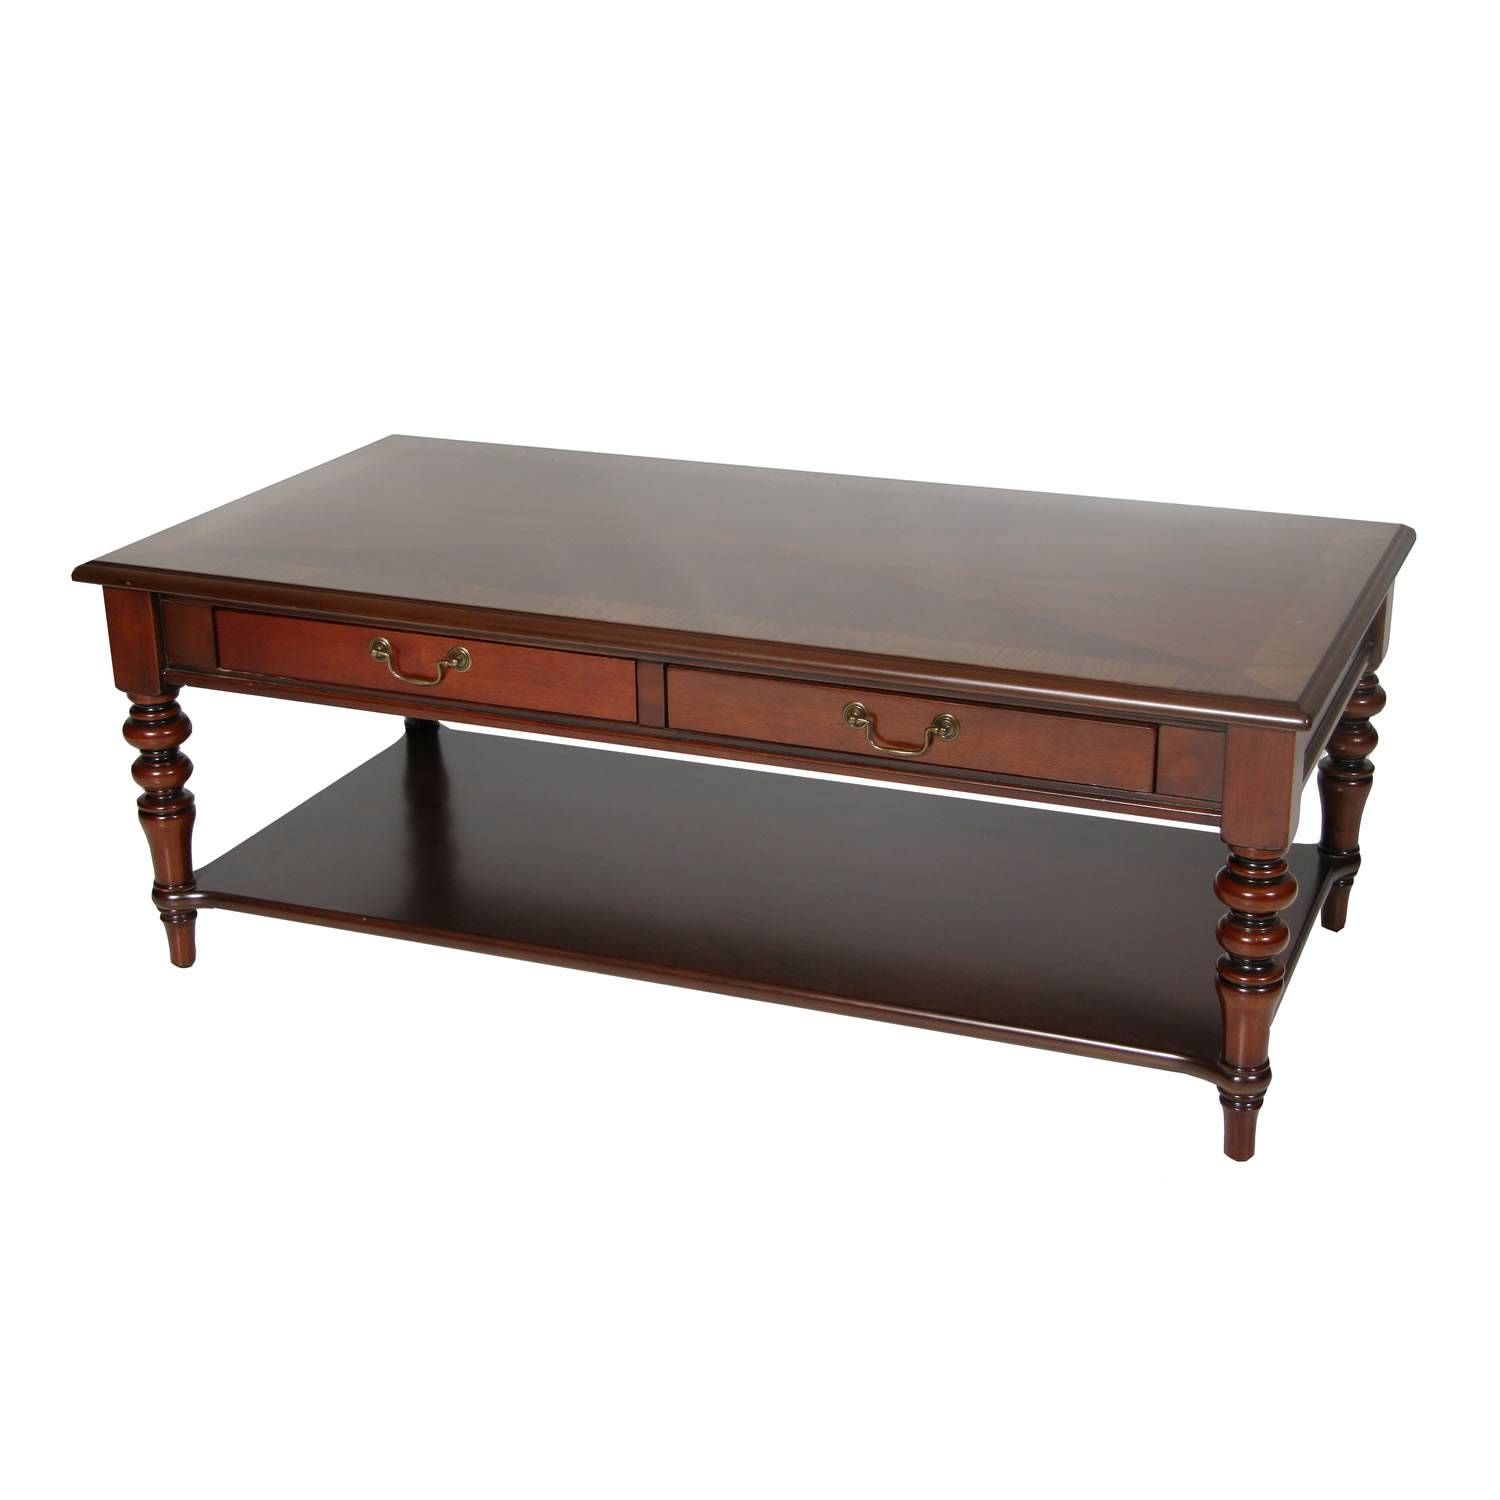 Coffee Table: Fascinating Mahogany Coffee Table Ideas Large In Coffee Tables With Shelves (View 6 of 30)